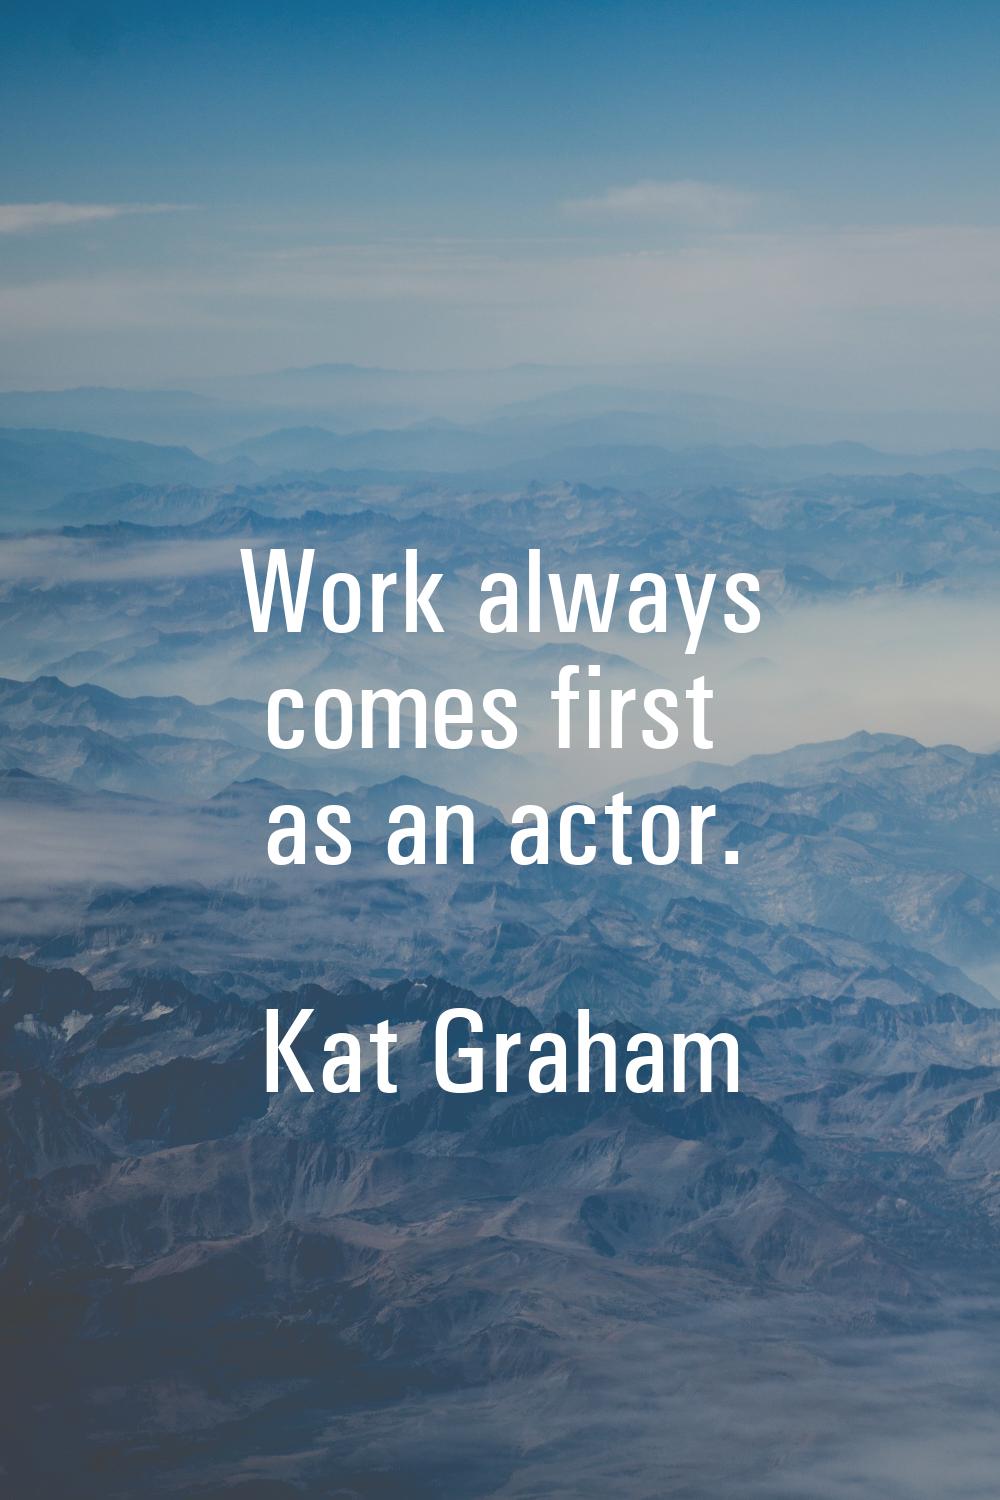 Work always comes first as an actor.